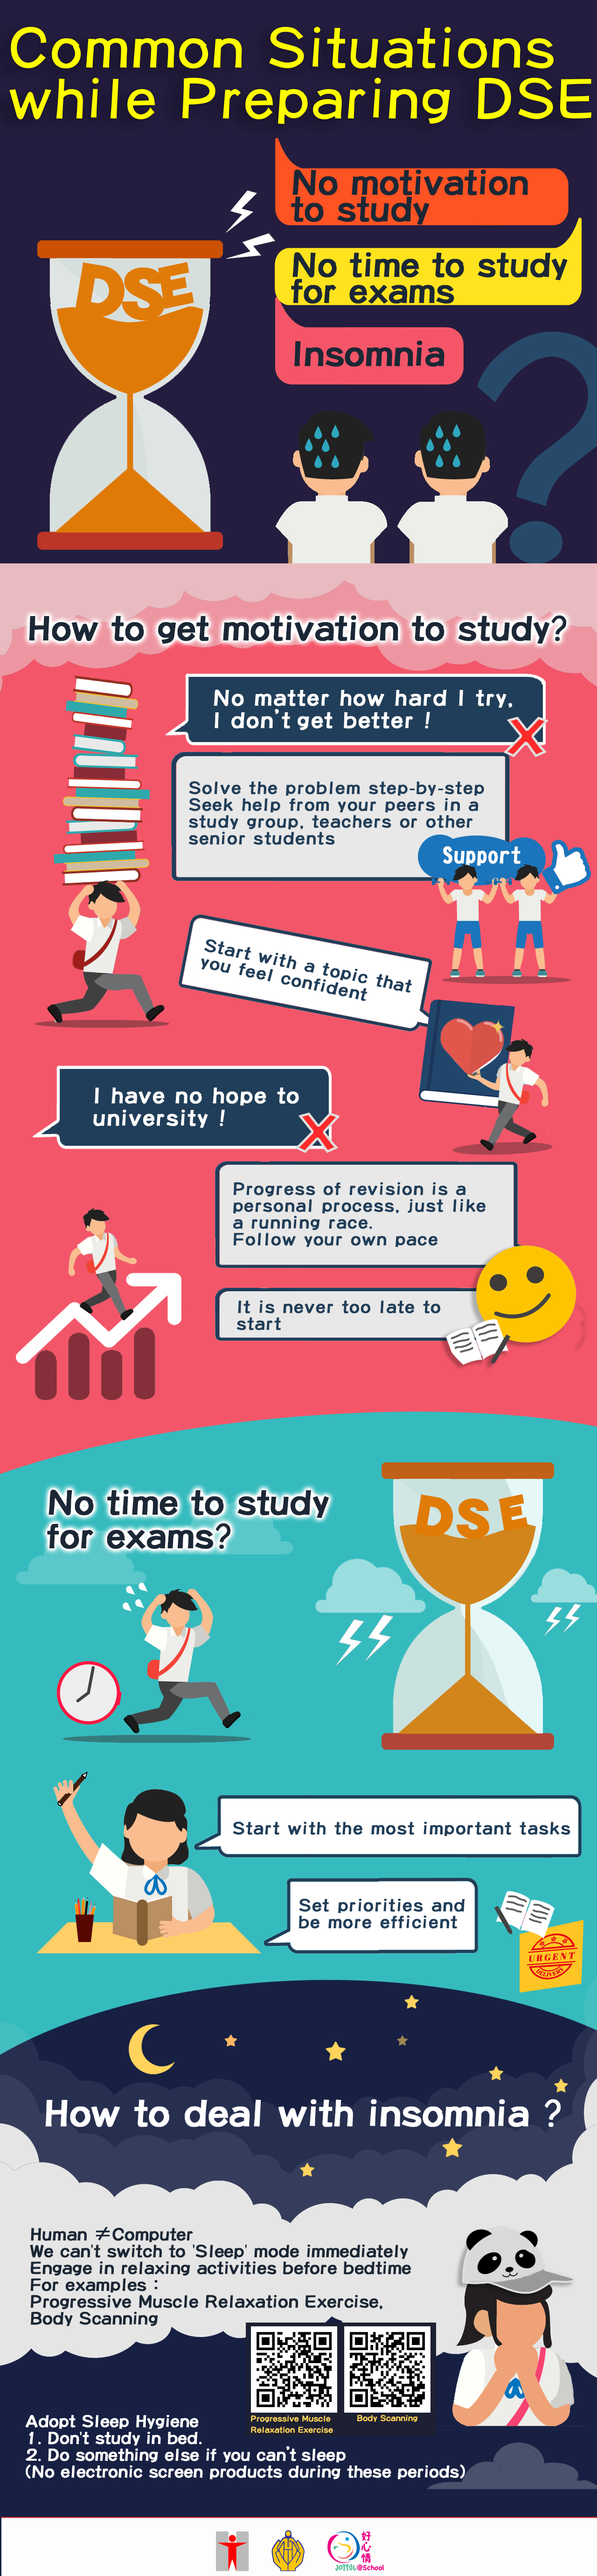 Common Situations while Preparing DSE / No motivation to study? No time to study for exams? Insomnia? / Insomnia / How to deal with insomnia? Human ≠ Computer We can't switch to 'Sleep' mode immediately Engage in relaxing activities before bedtime For examples： Progressive Muscle Relaxation Exercise, Body Scanning / Adopt Sleep Hygiene 1. Don't study in bed. 2. Do something else if you can’t sleep (No electronic screen products during these periods)/ No time to study. Start with the most important tasks / Set priorities and be more efficient. / Low motivation. To clarify your thoughtsNo matter how hard I try I don’t get better!Solve the problem step-by-step Seek help from your peers in a study group, teachers or other senior students / I have no hope to university!Progress of revision is a personal process, just like a running race. Follow your own pace / More self-encouragement. It is never too late to start!